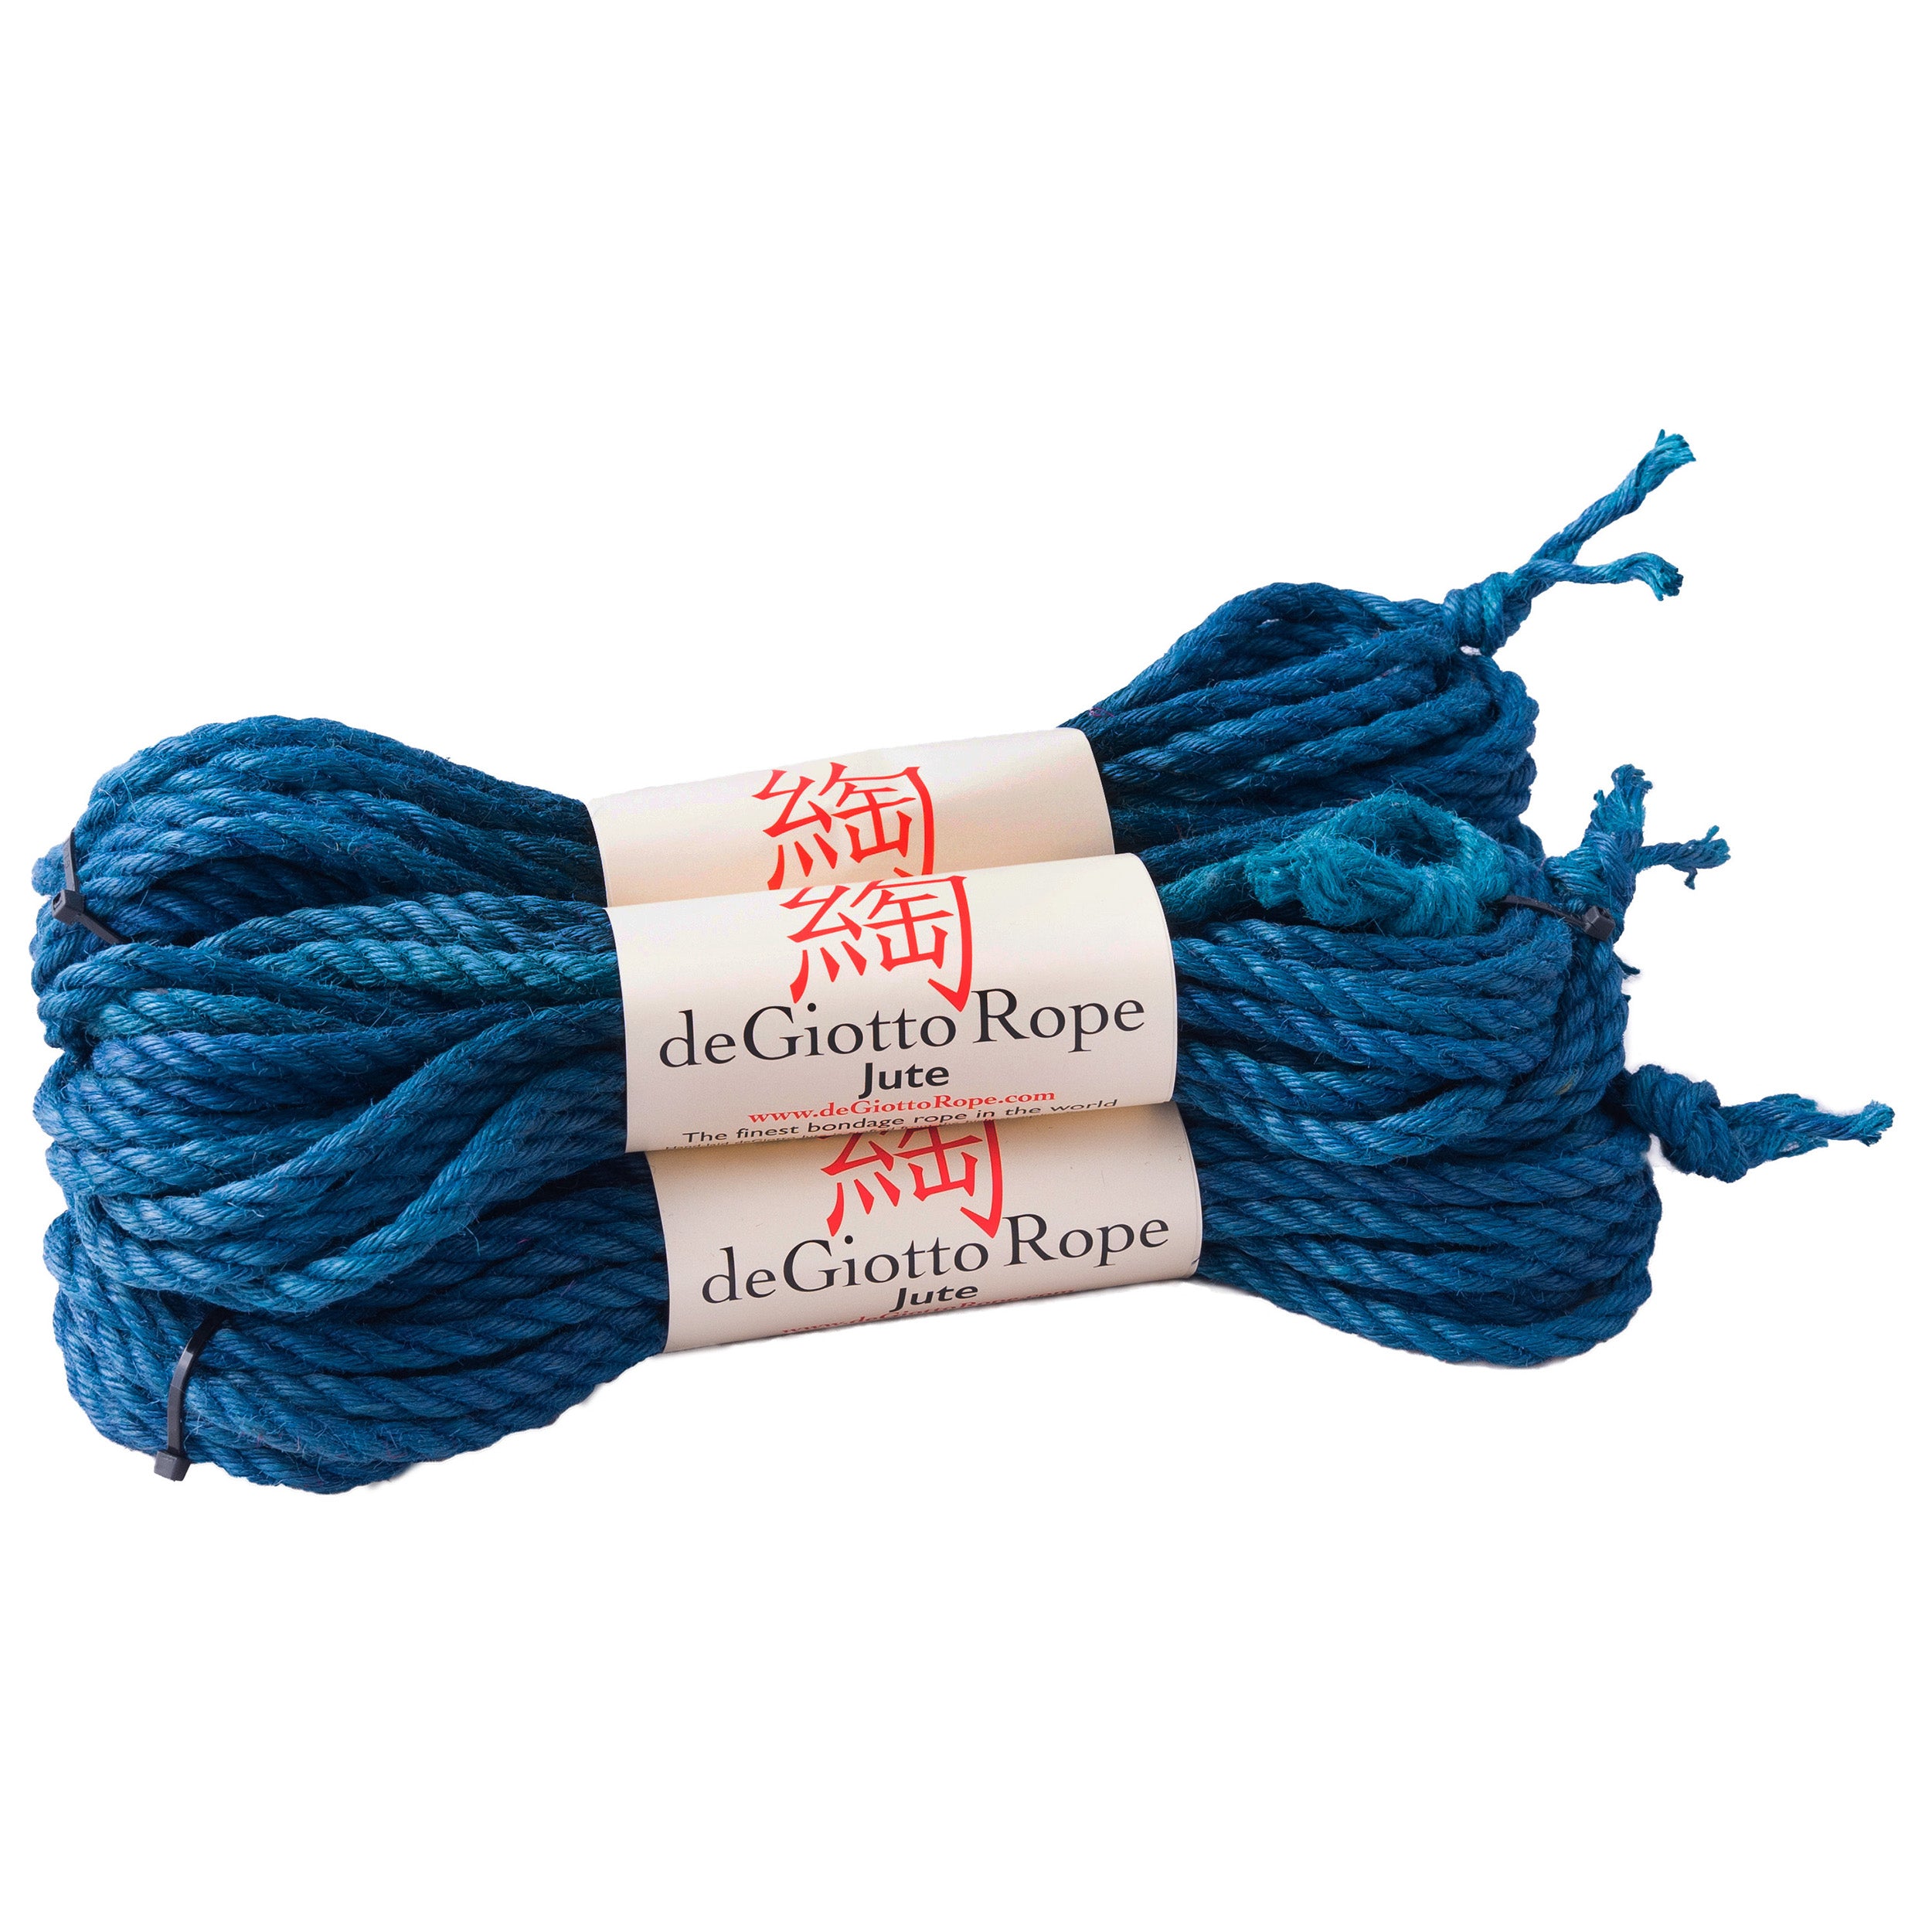 Spooled Natural & Dyed Jute Rope 300+ feet Ready to use – deGiotto